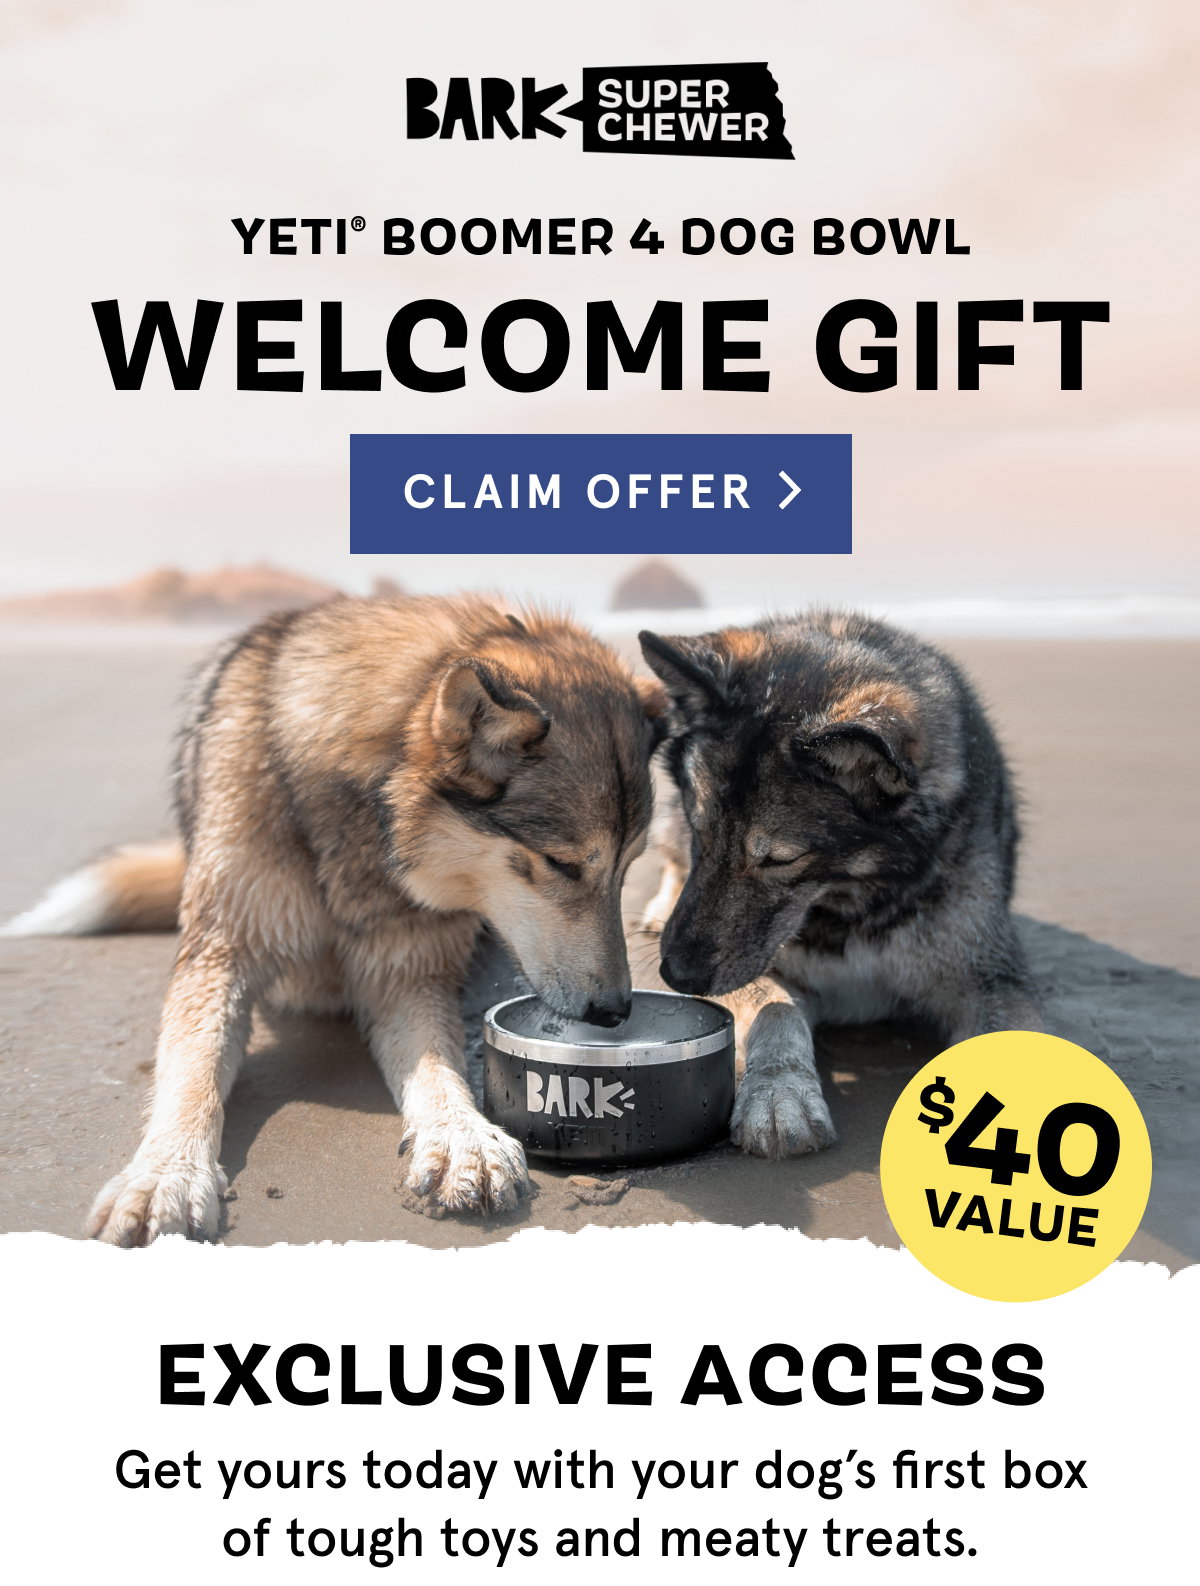 Barkbox is offering a free Yeti dog bowl with sign up for a